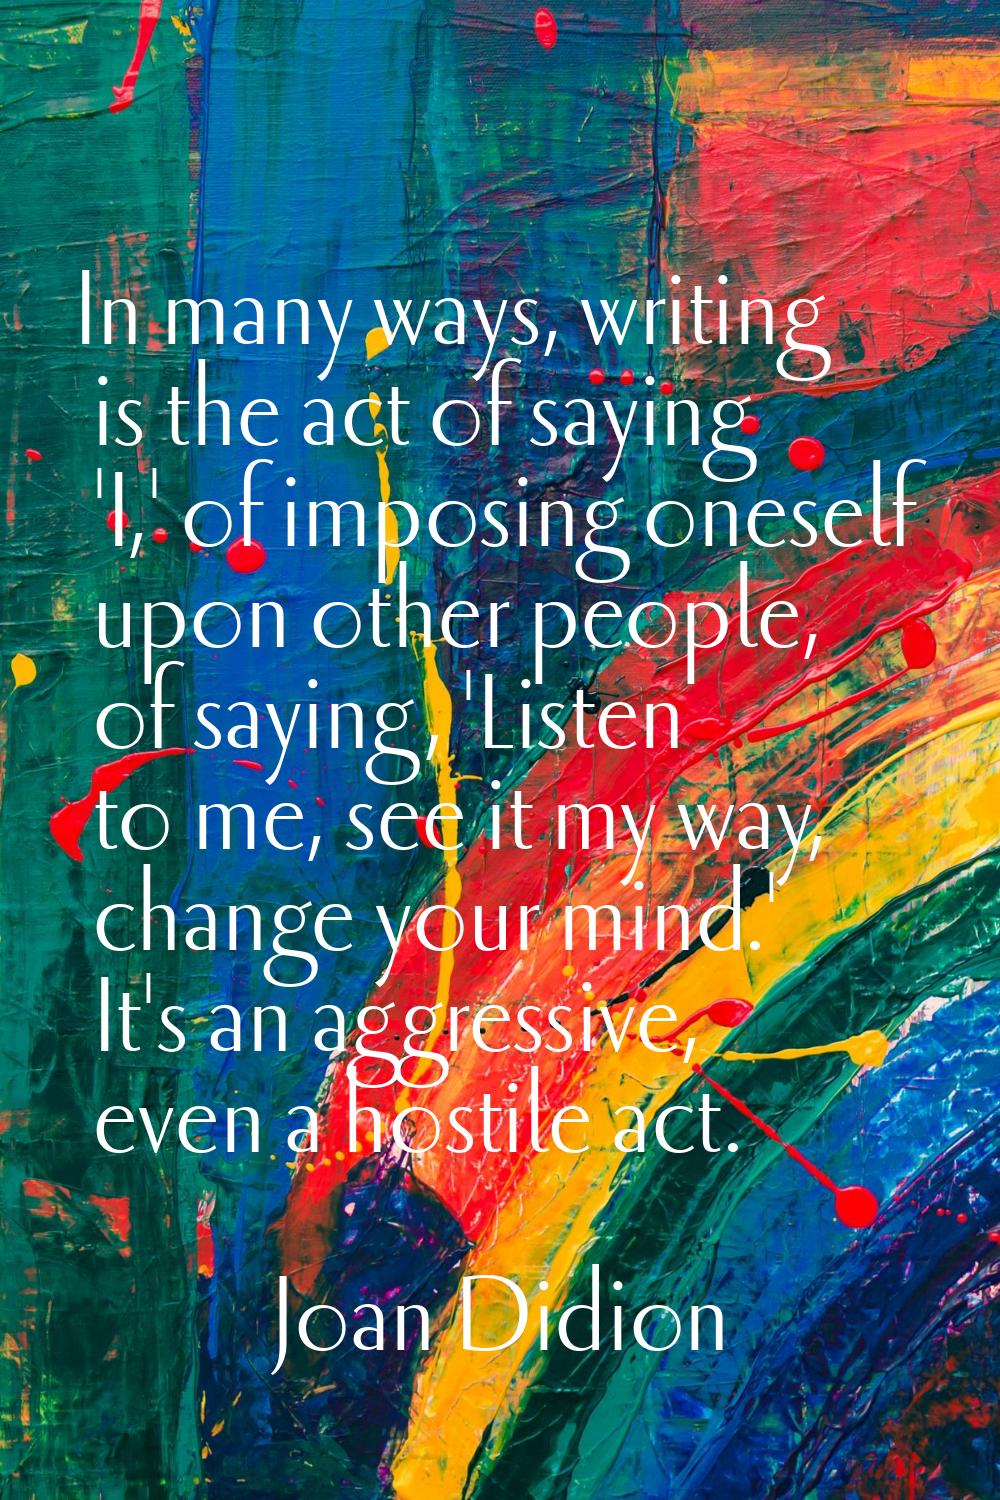 In many ways, writing is the act of saying 'I,' of imposing oneself upon other people, of saying, '